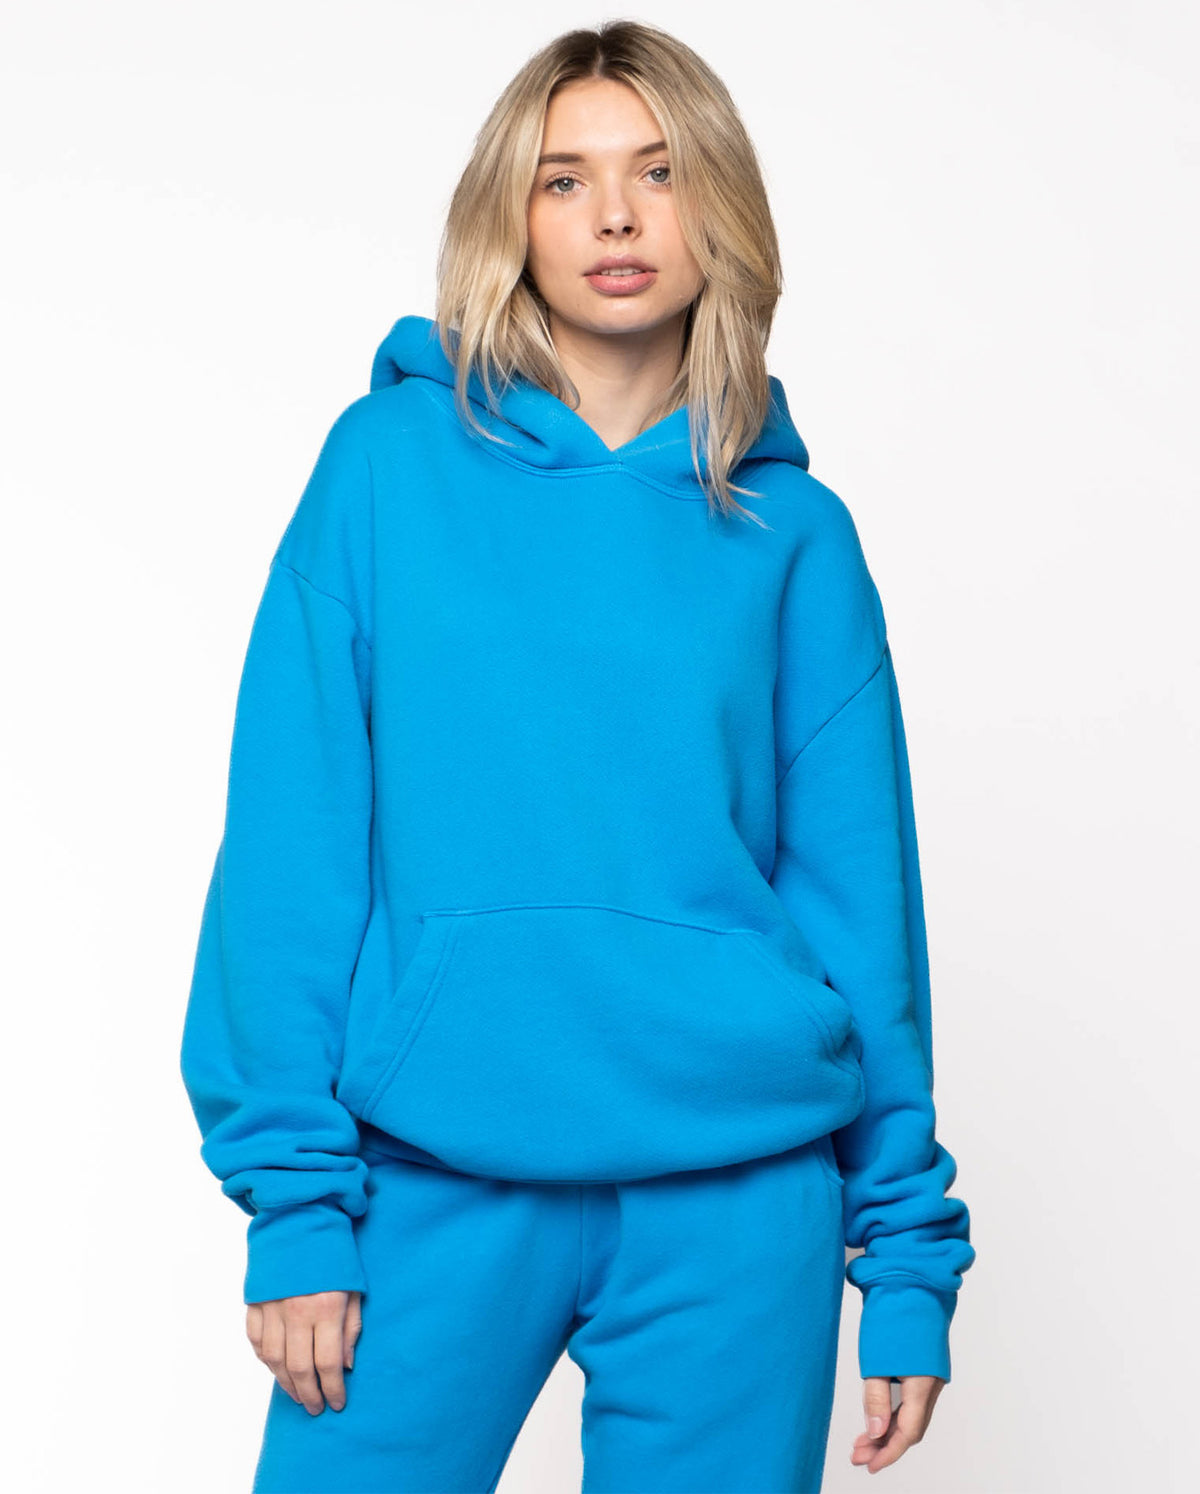 Hoodie In Turquoise